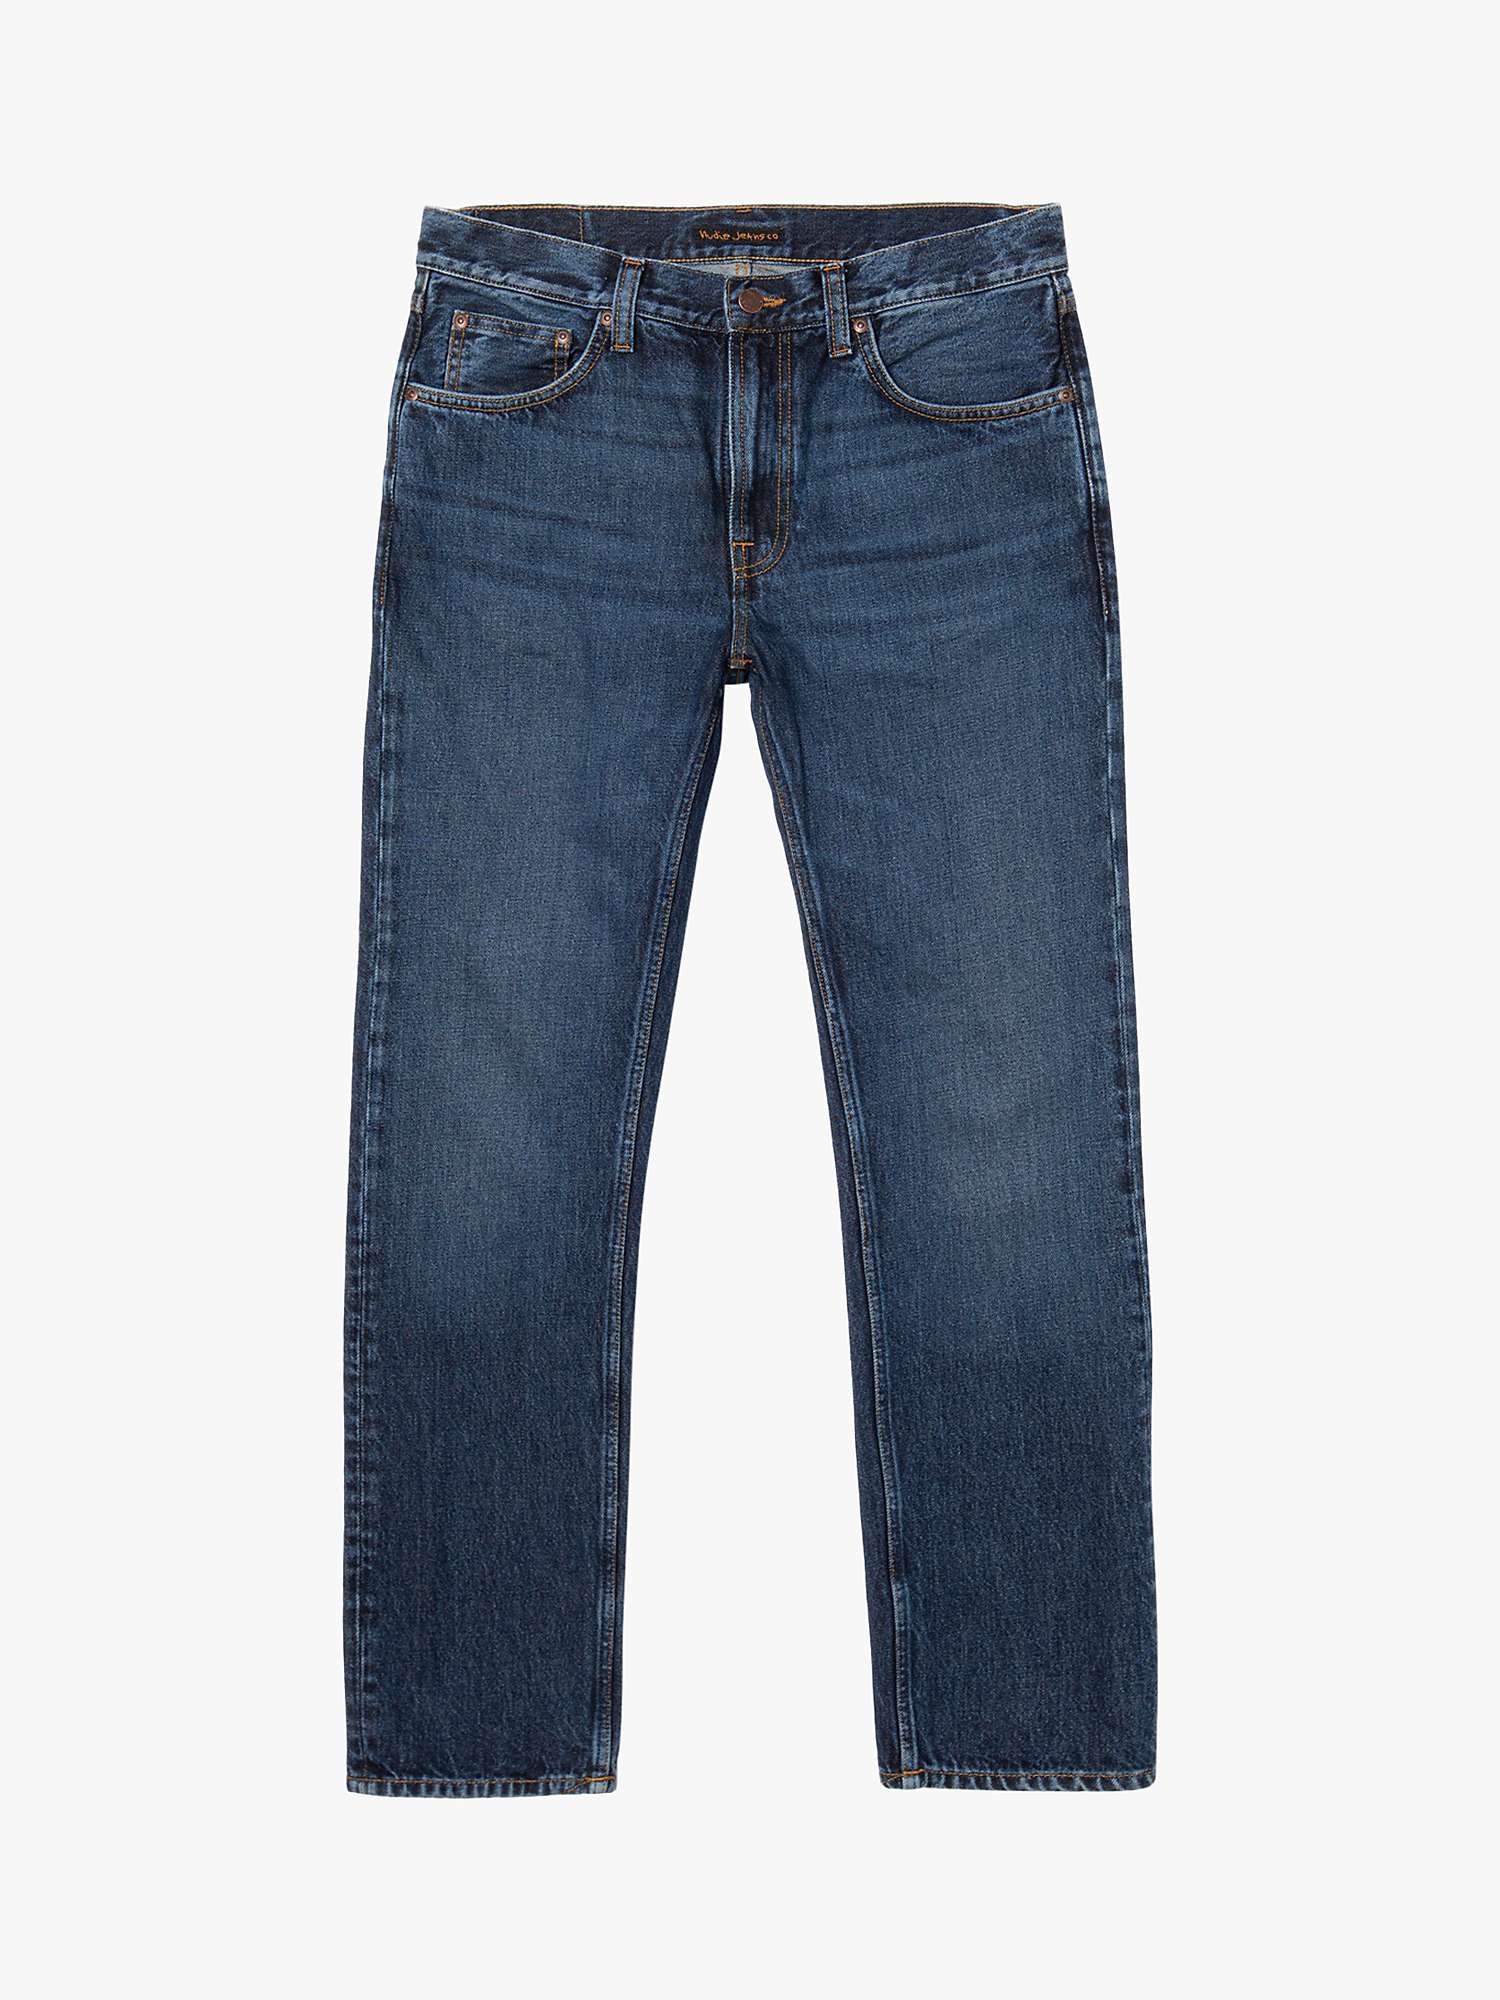 Buy Nudie Jeans Gritty Jackson Organic Cotton Regular Fit Jeans Online at johnlewis.com